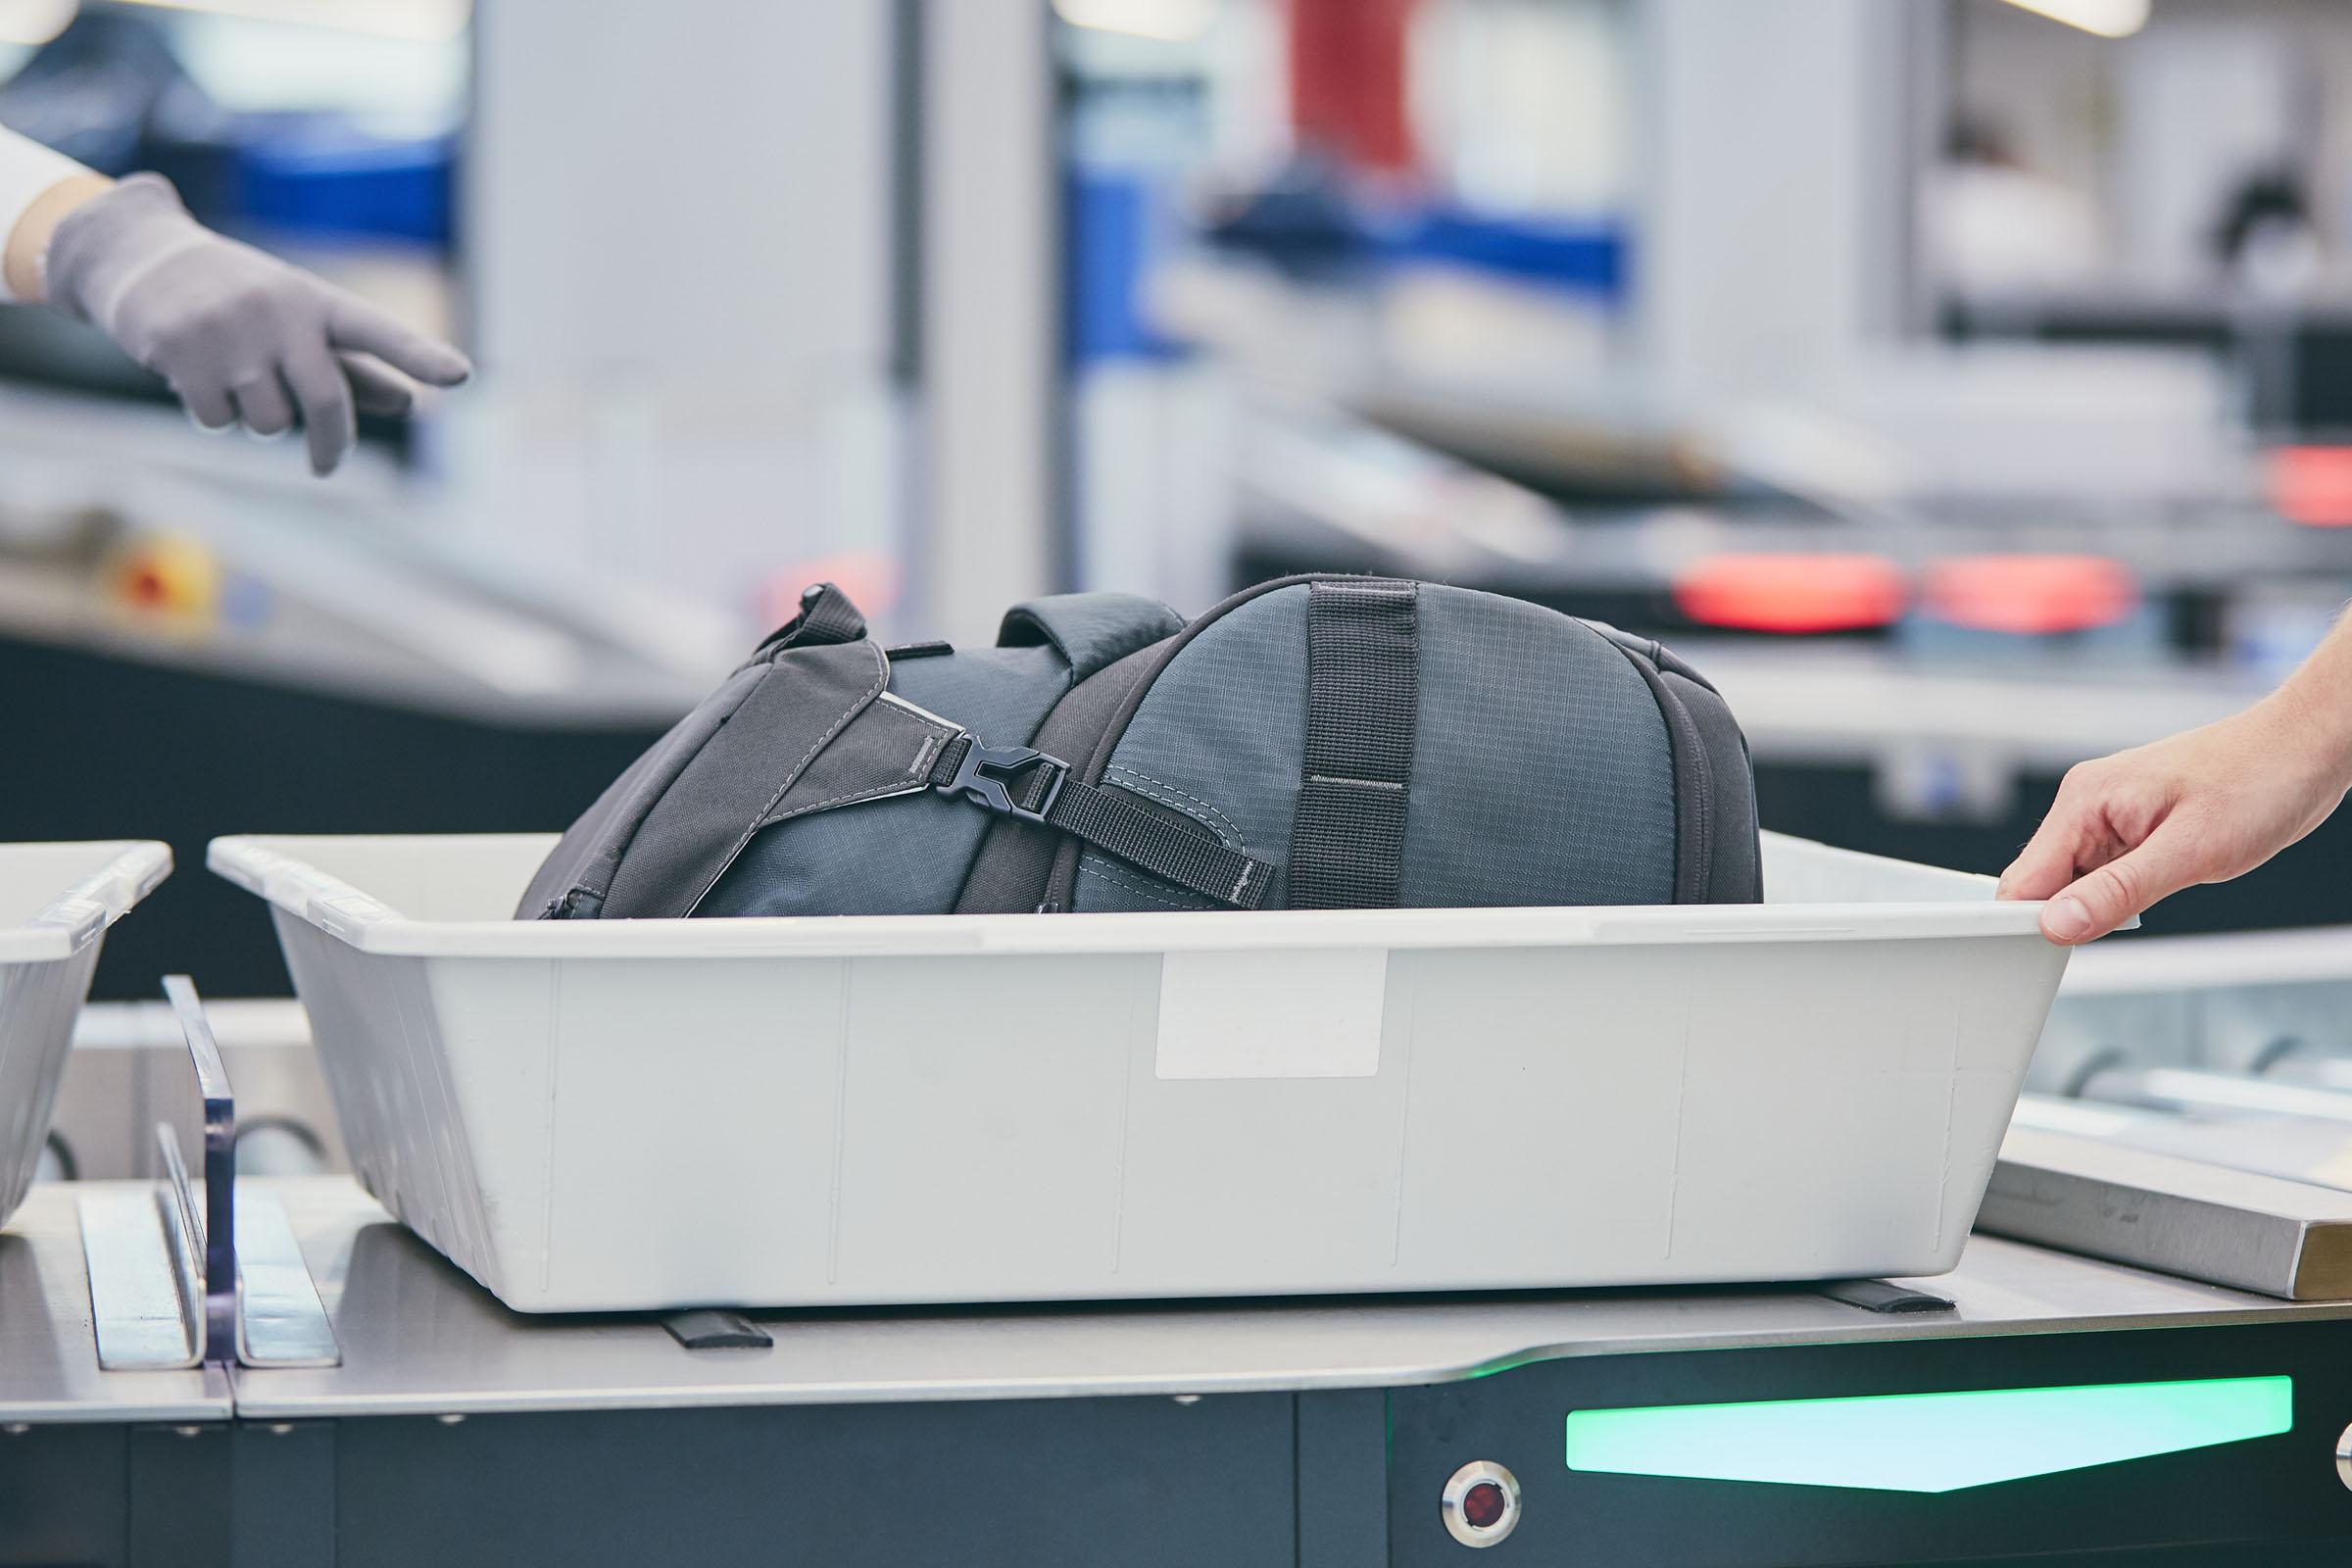 bin with luggage on airport security scanner conveyer belt